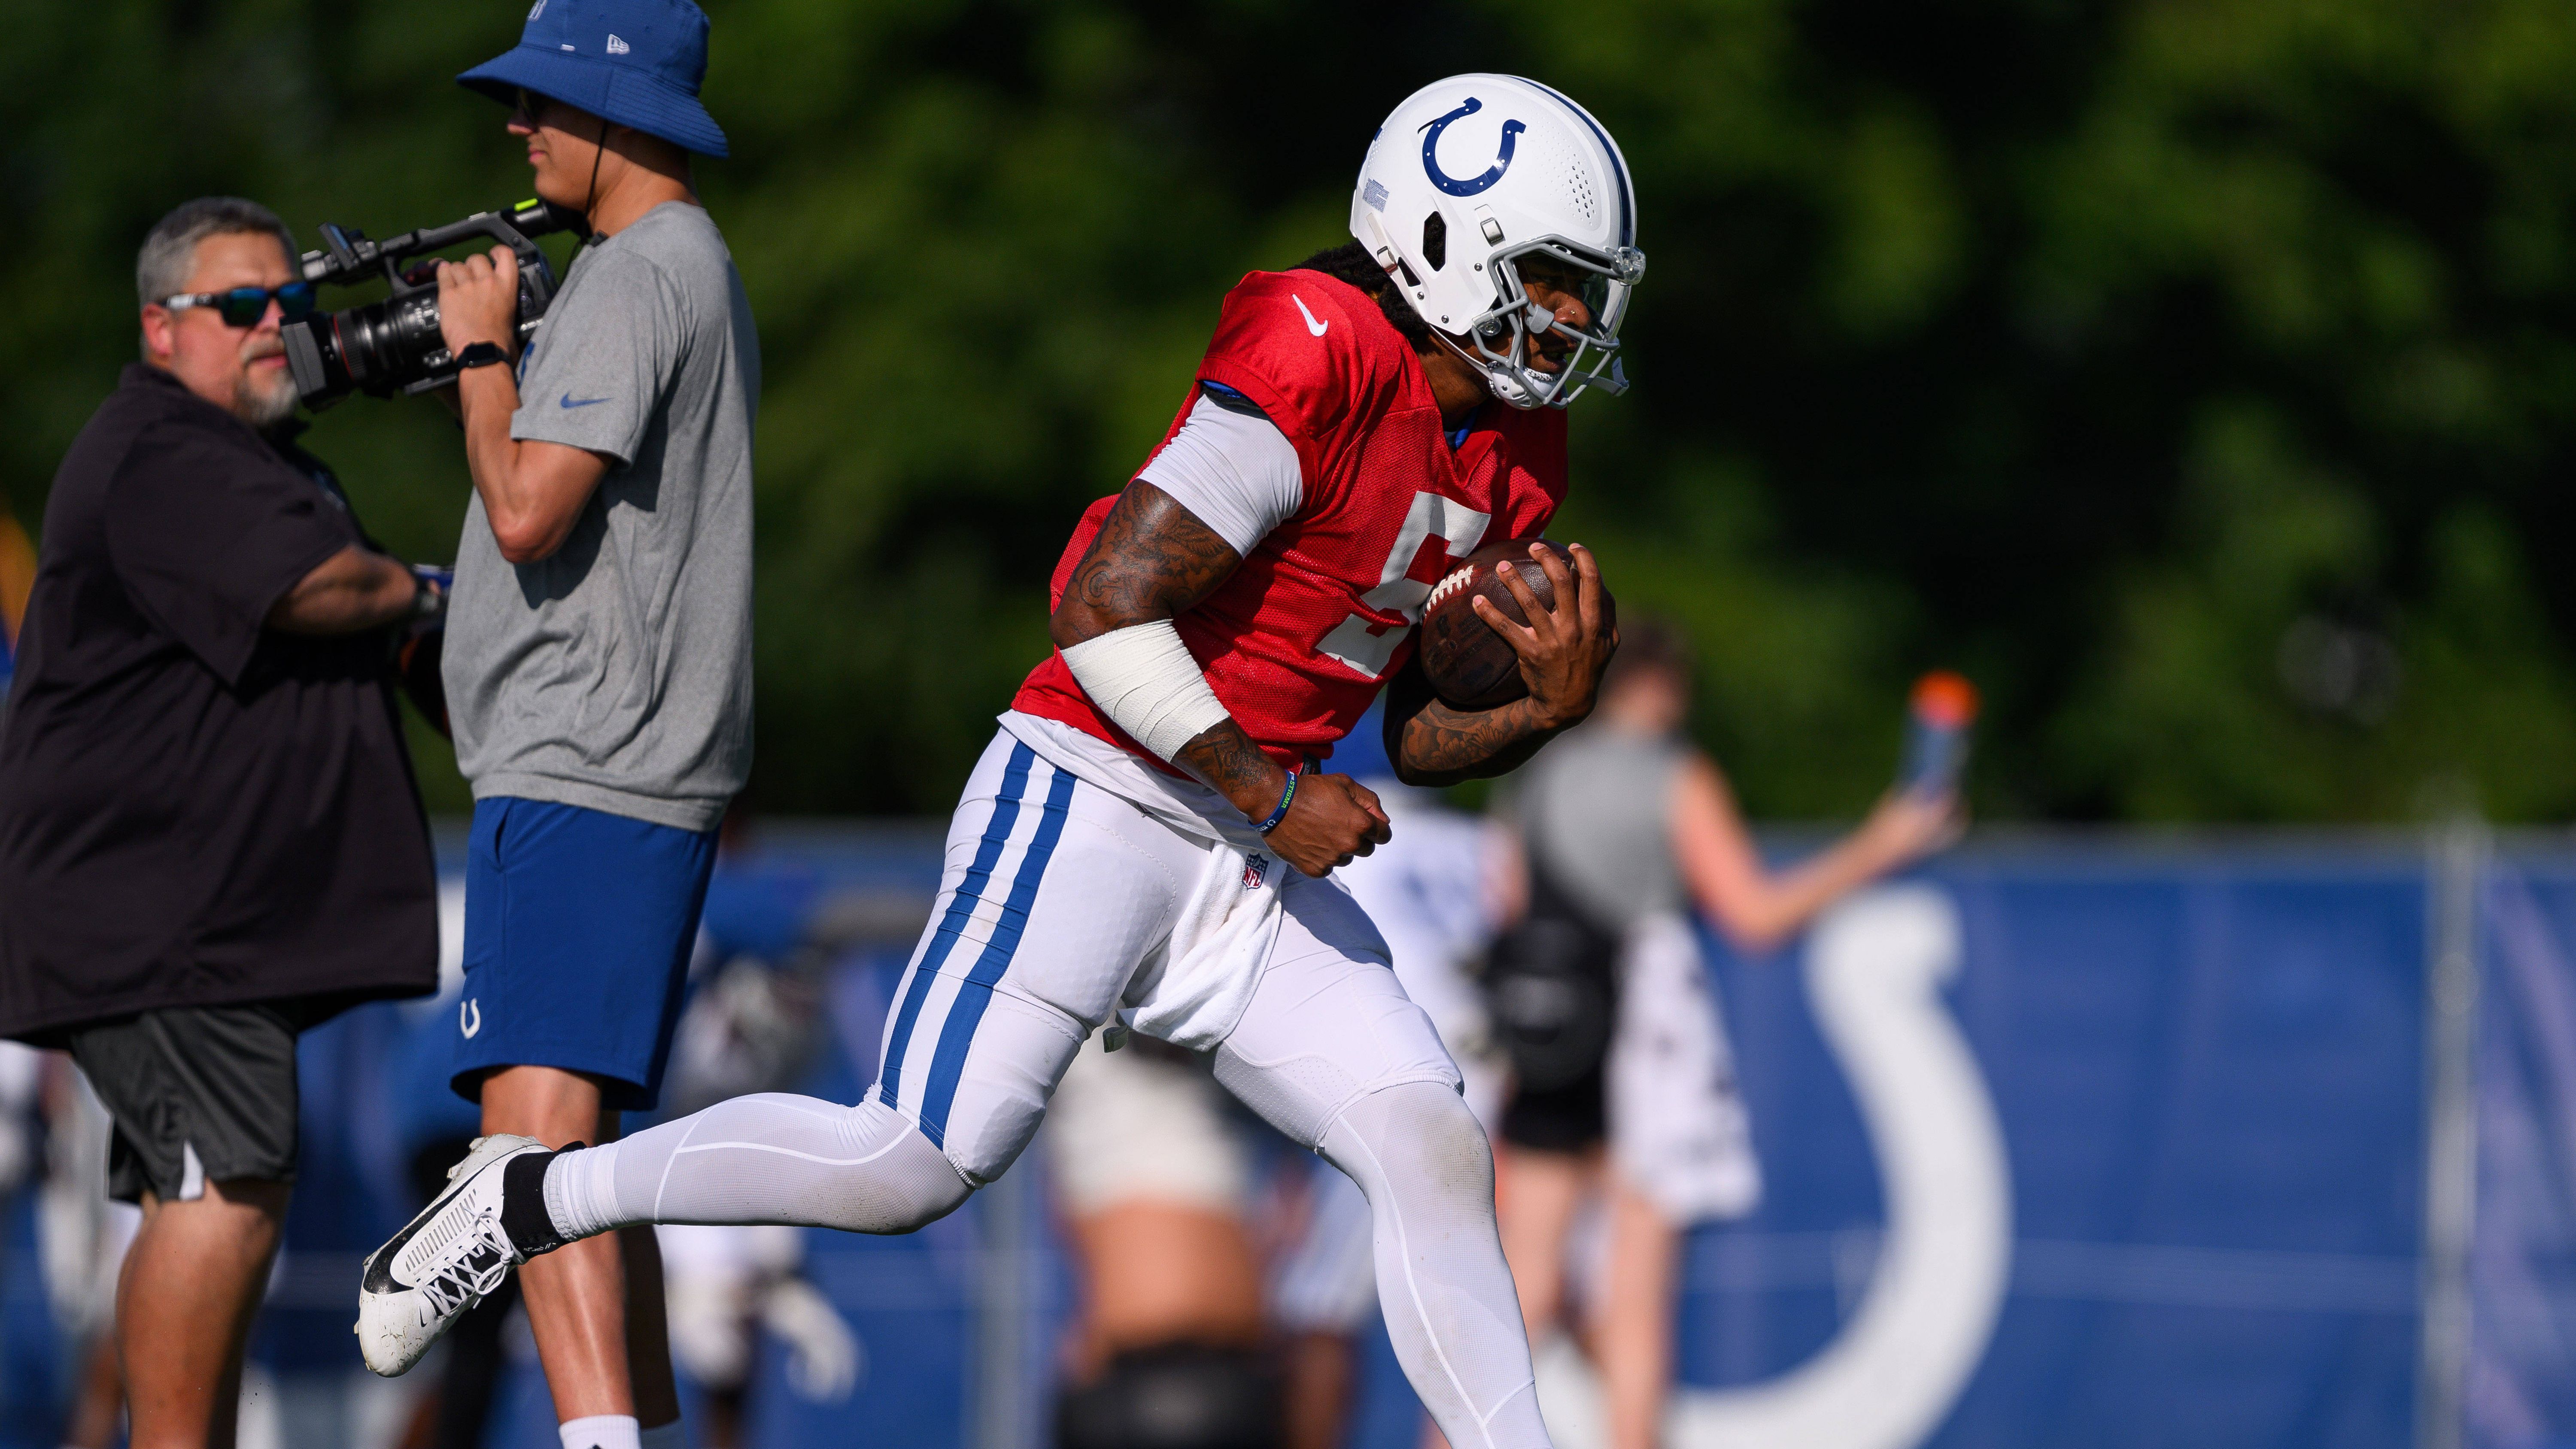 <strong>Indianapolis Colts</strong><br>OTA Offseason Workouts: 21. - 23. Mai, 29. - 31. Mai<br>Mandatory Minicamp: 4. - 6. Juni